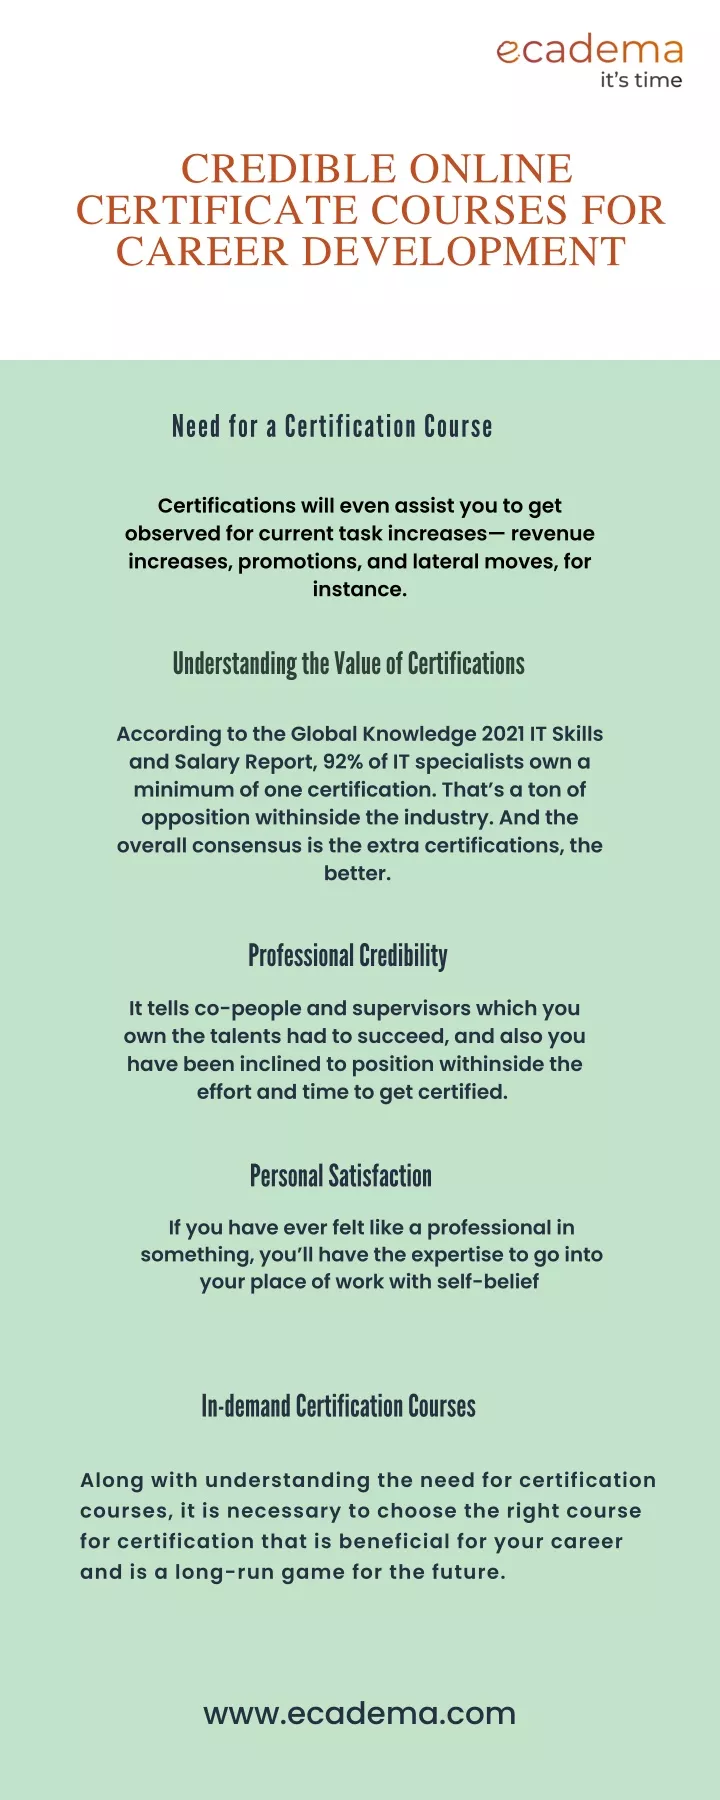 credible online certificate courses for career